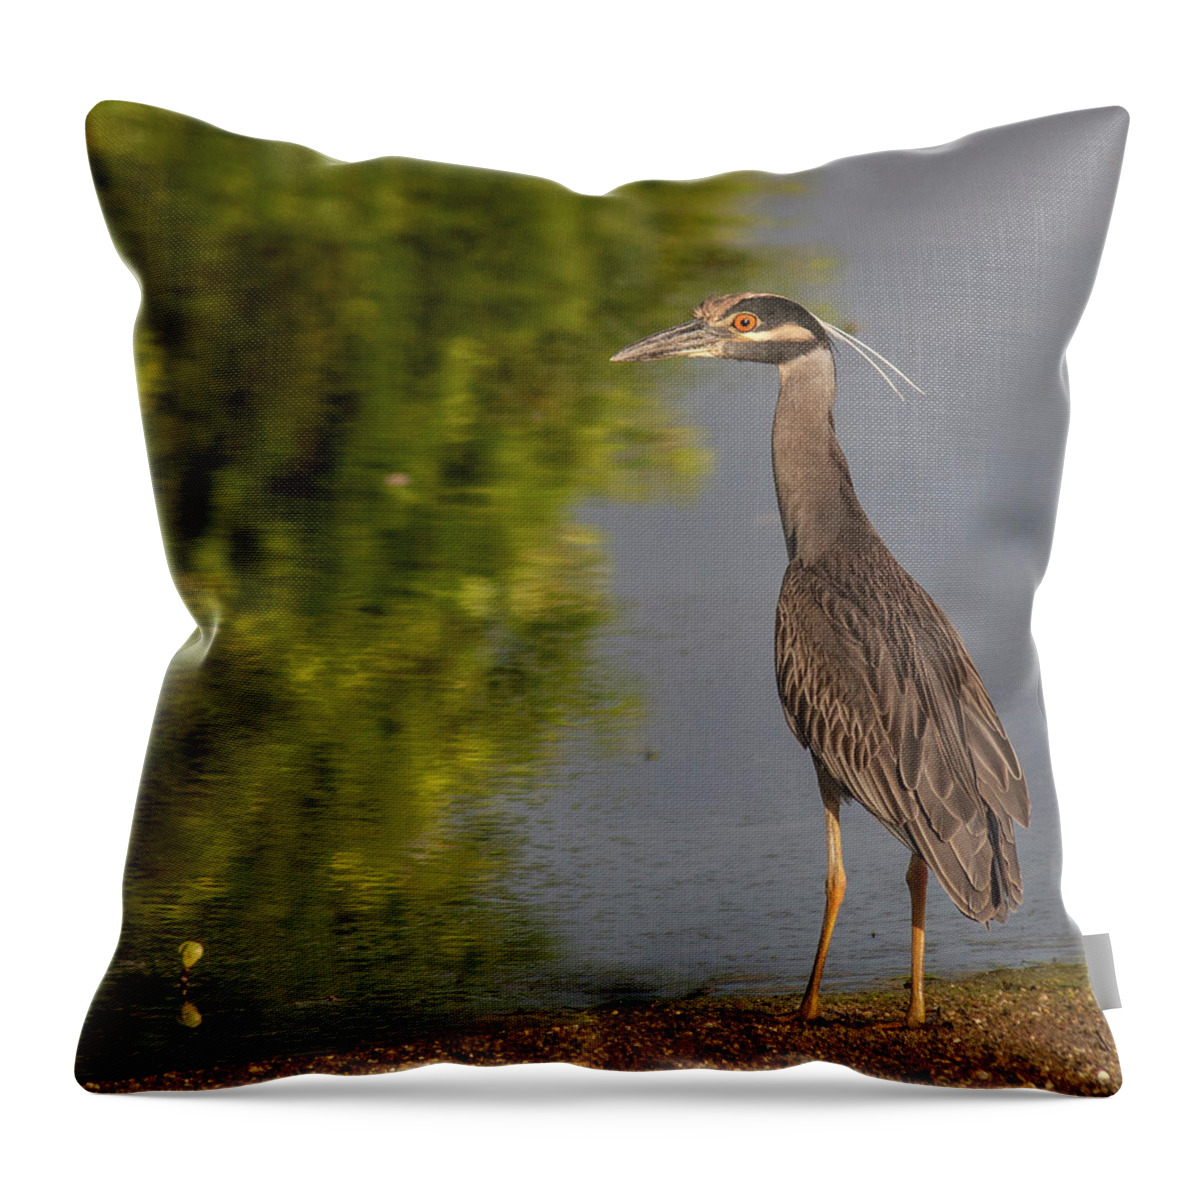 Birds Throw Pillow featuring the photograph Attentive Heron by Jean Noren